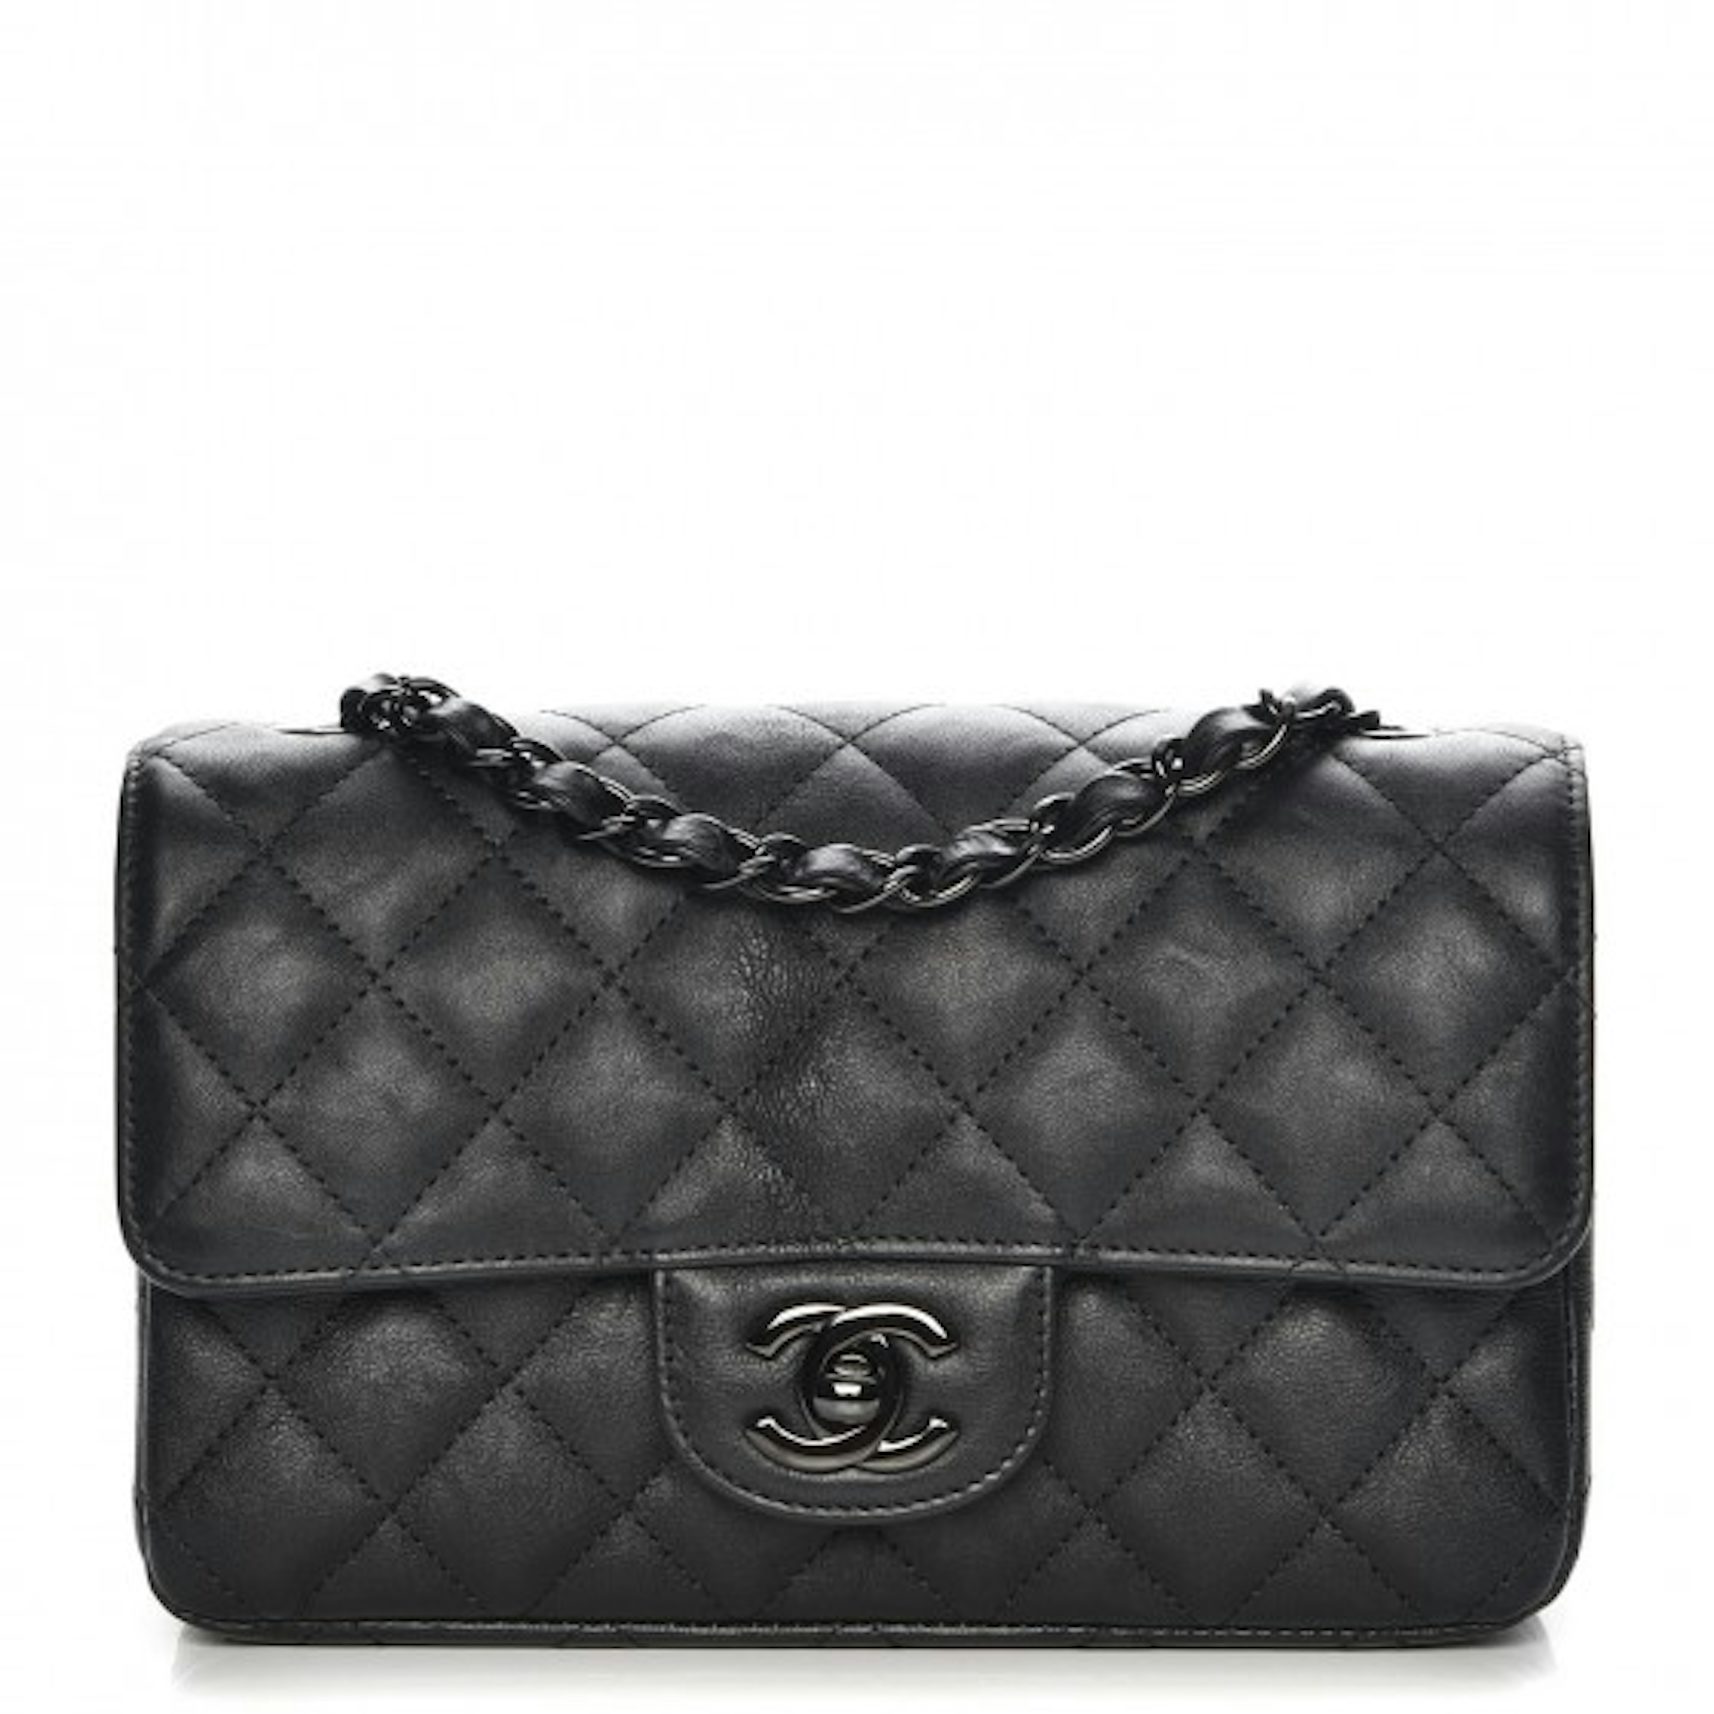 Chanel Chocolate Caviar Leather Timeless Cc Wallet On Chain in